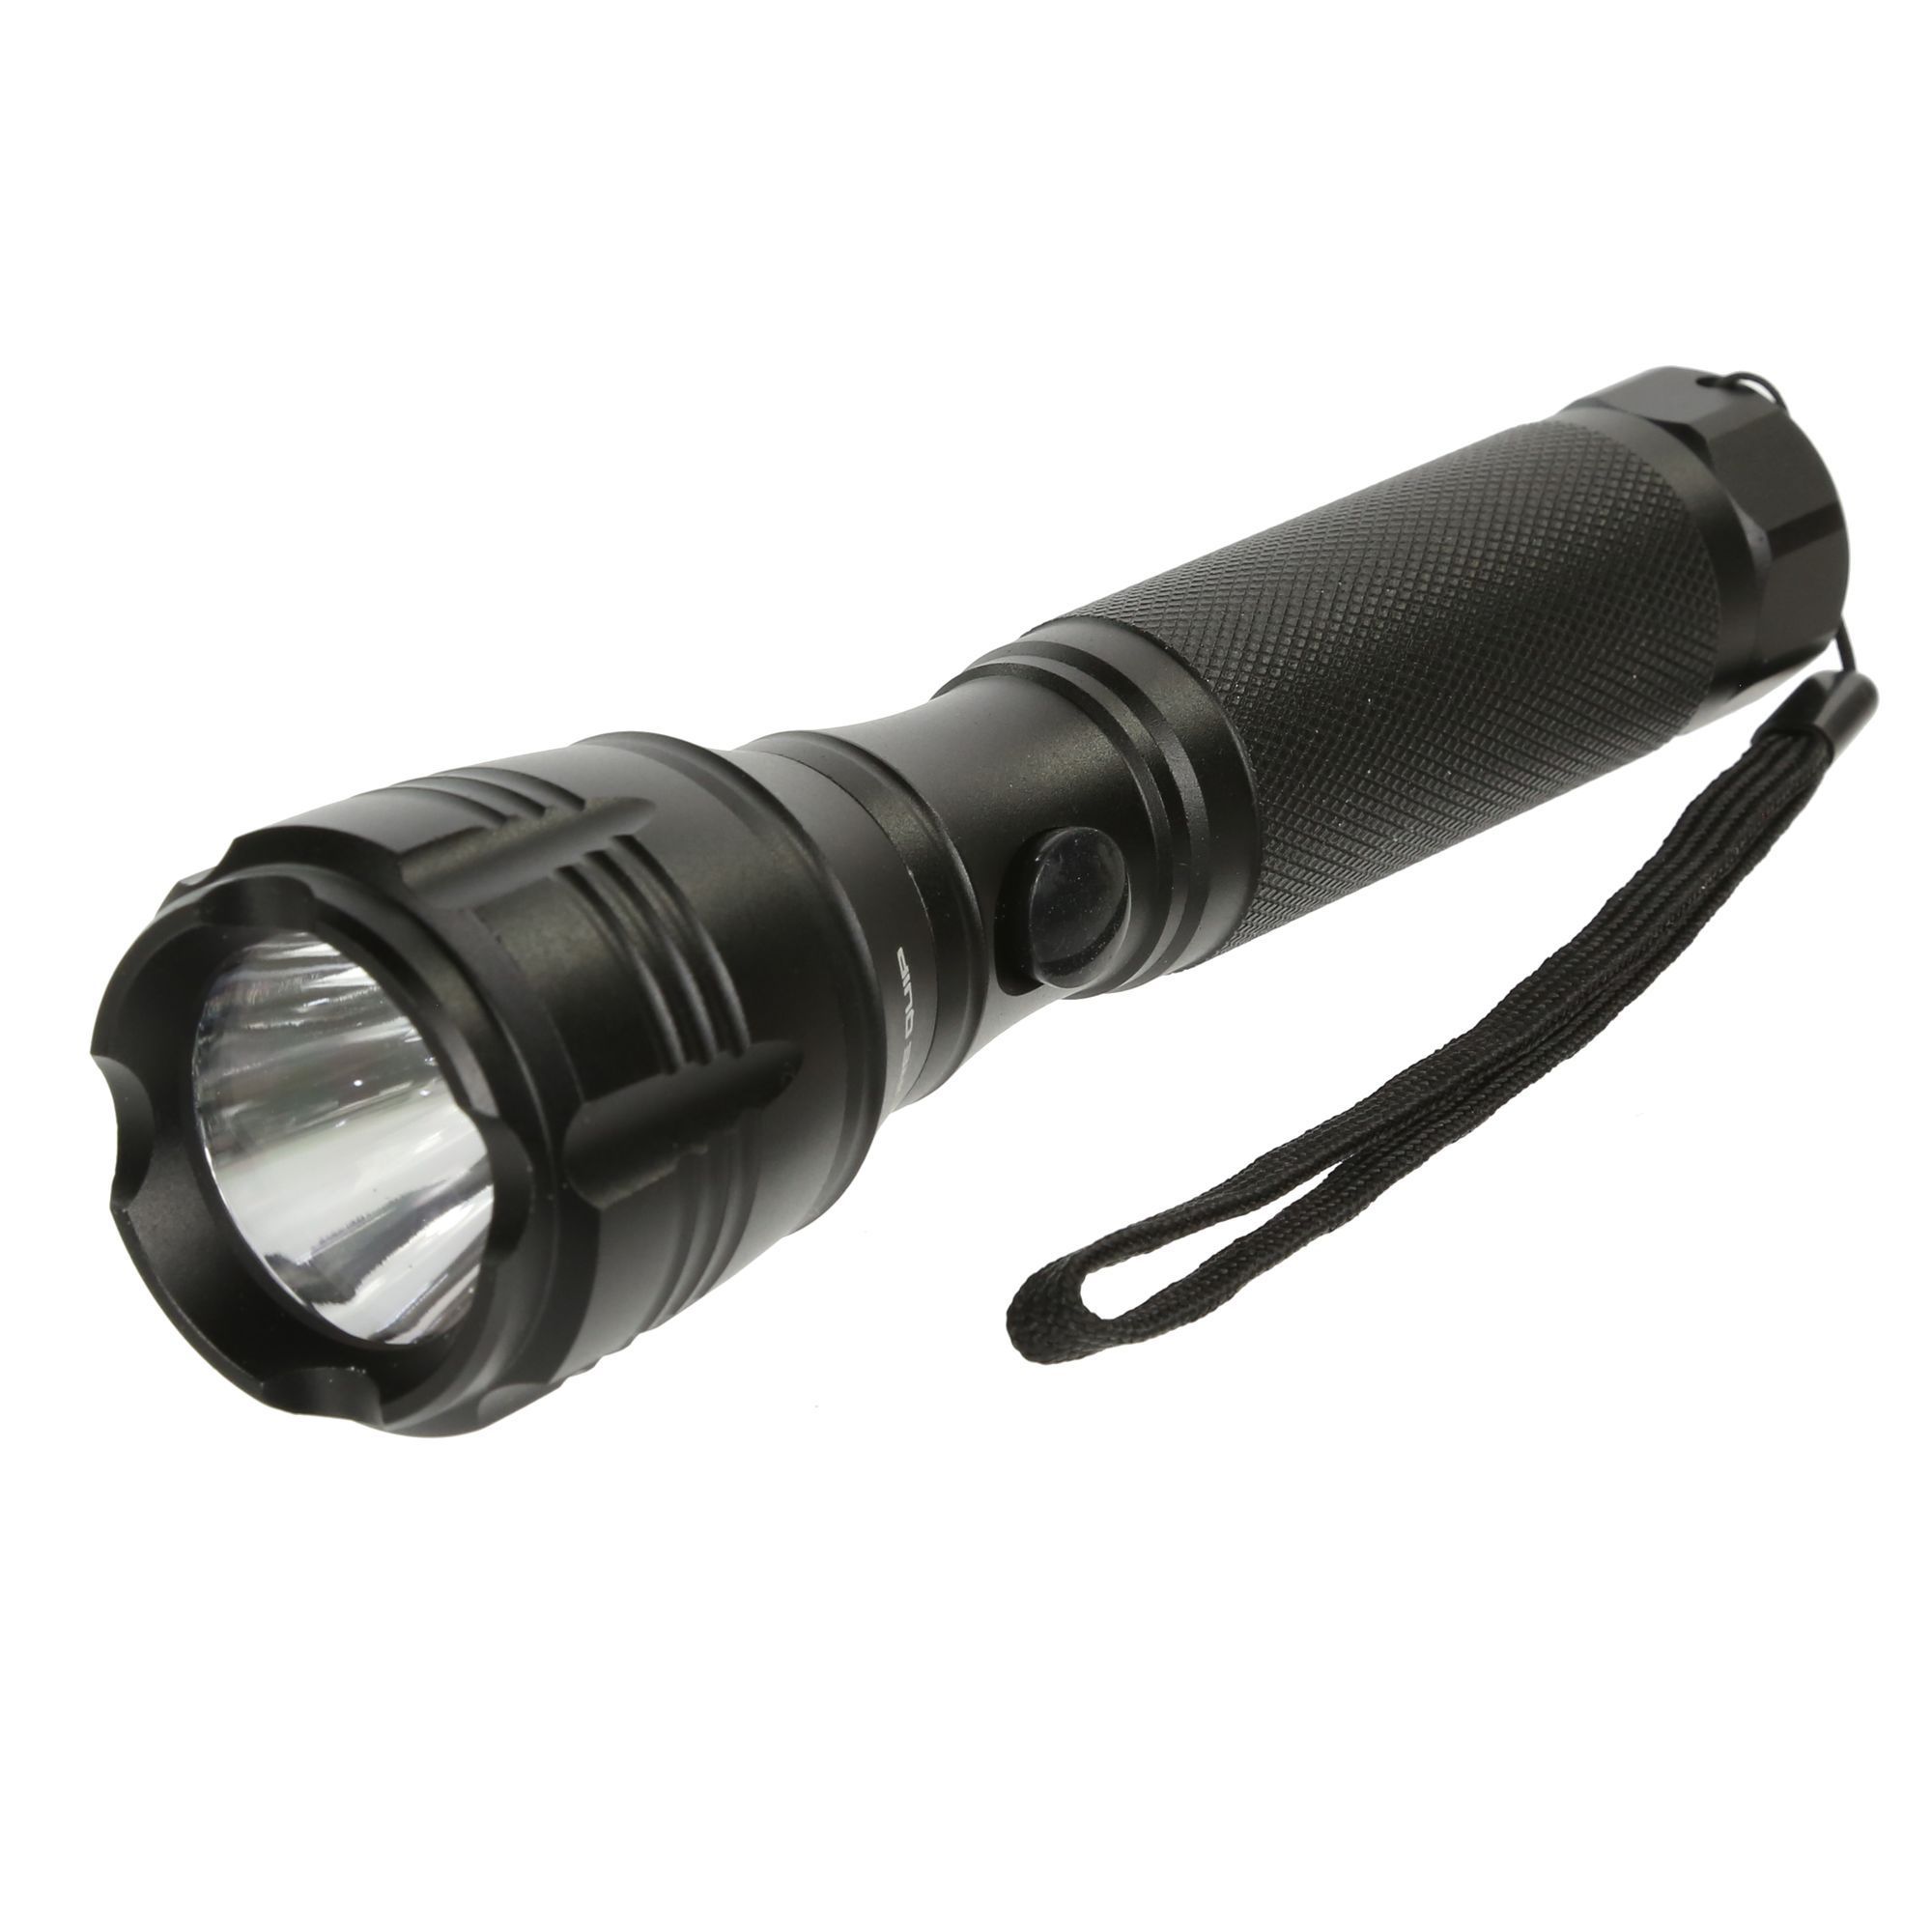 90% aluminium, 5% metal fibre and 5% rubber. Cree technology. 150 lumens of light. 3 x aaa batteries included. Aluminium chassis. Wrist strap.